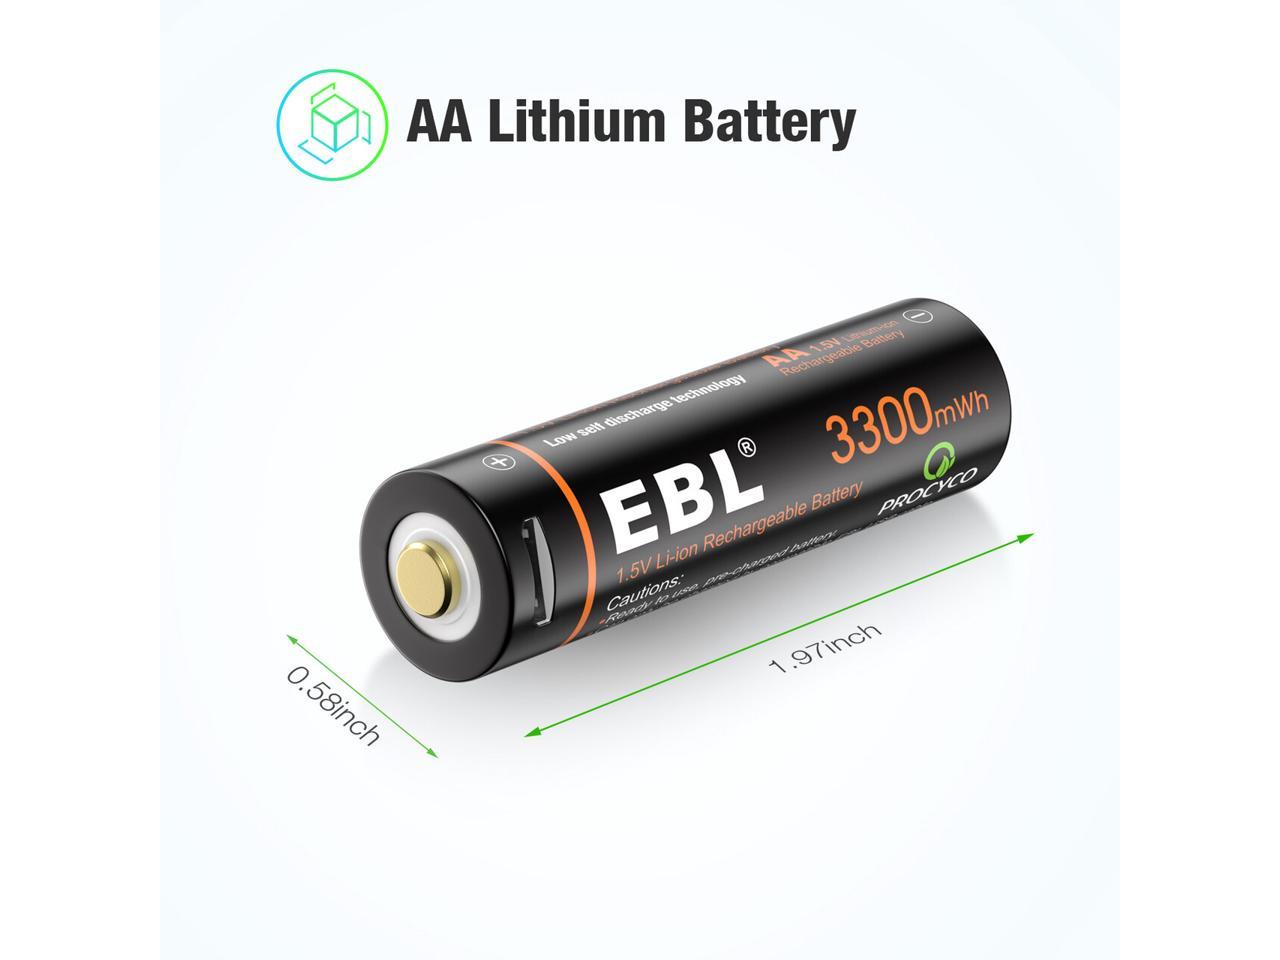 Includes 2-in-1 Micro USB Charger Cable Full Charge in 1.5 Hours 1250mAh 1.5V Fast Charge Lithium-Ion Double A Battery 4 Pcs Set with USB Charging Port Insten Rechargeable Lithium AA Batteries 